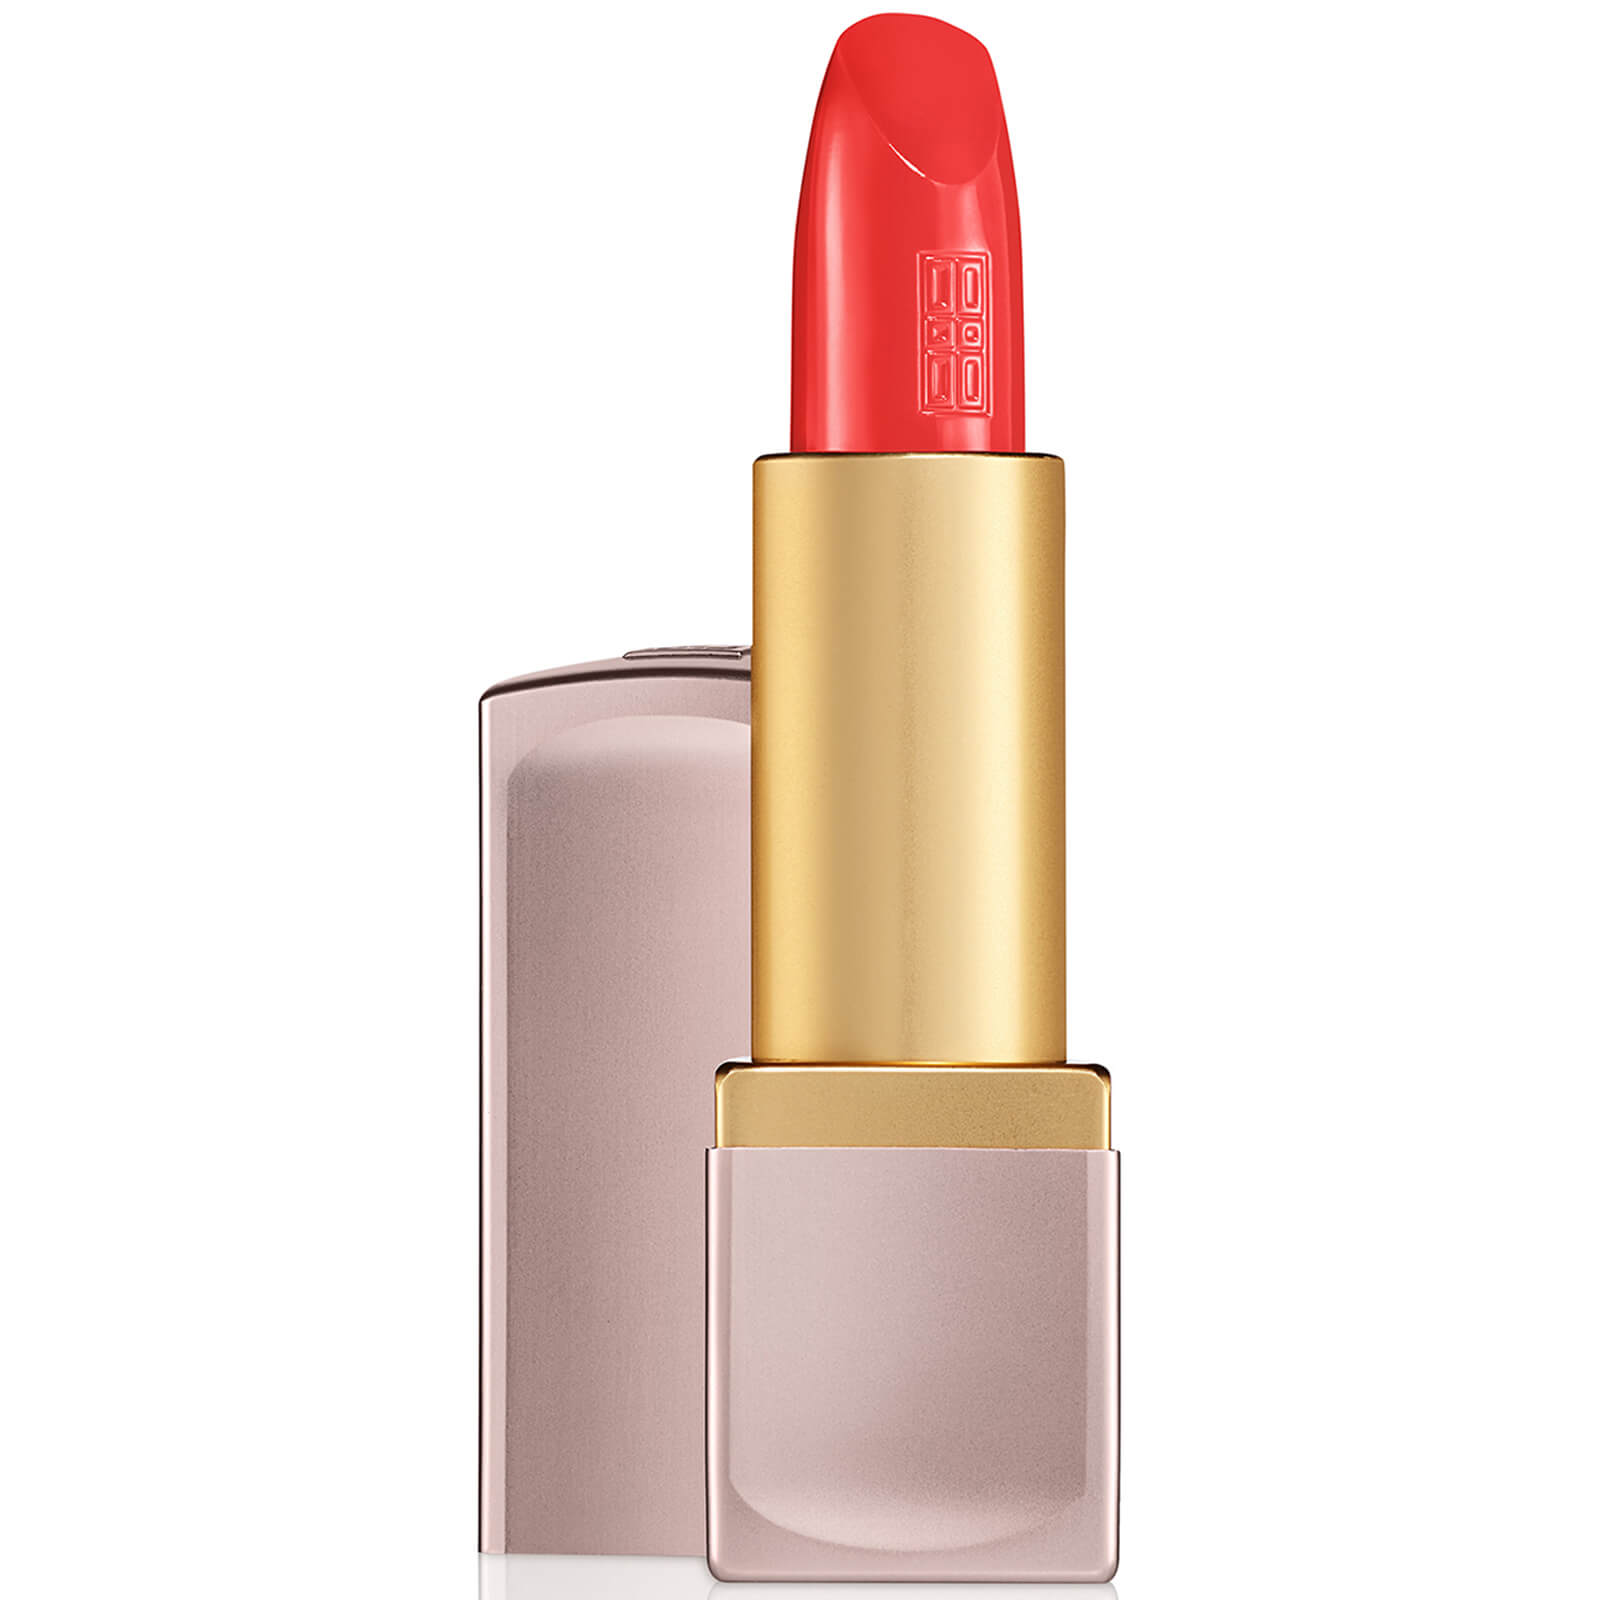 Elizabeth Arden Lip Color Lipstick 4g (various Shades) - Neoclassical Coral